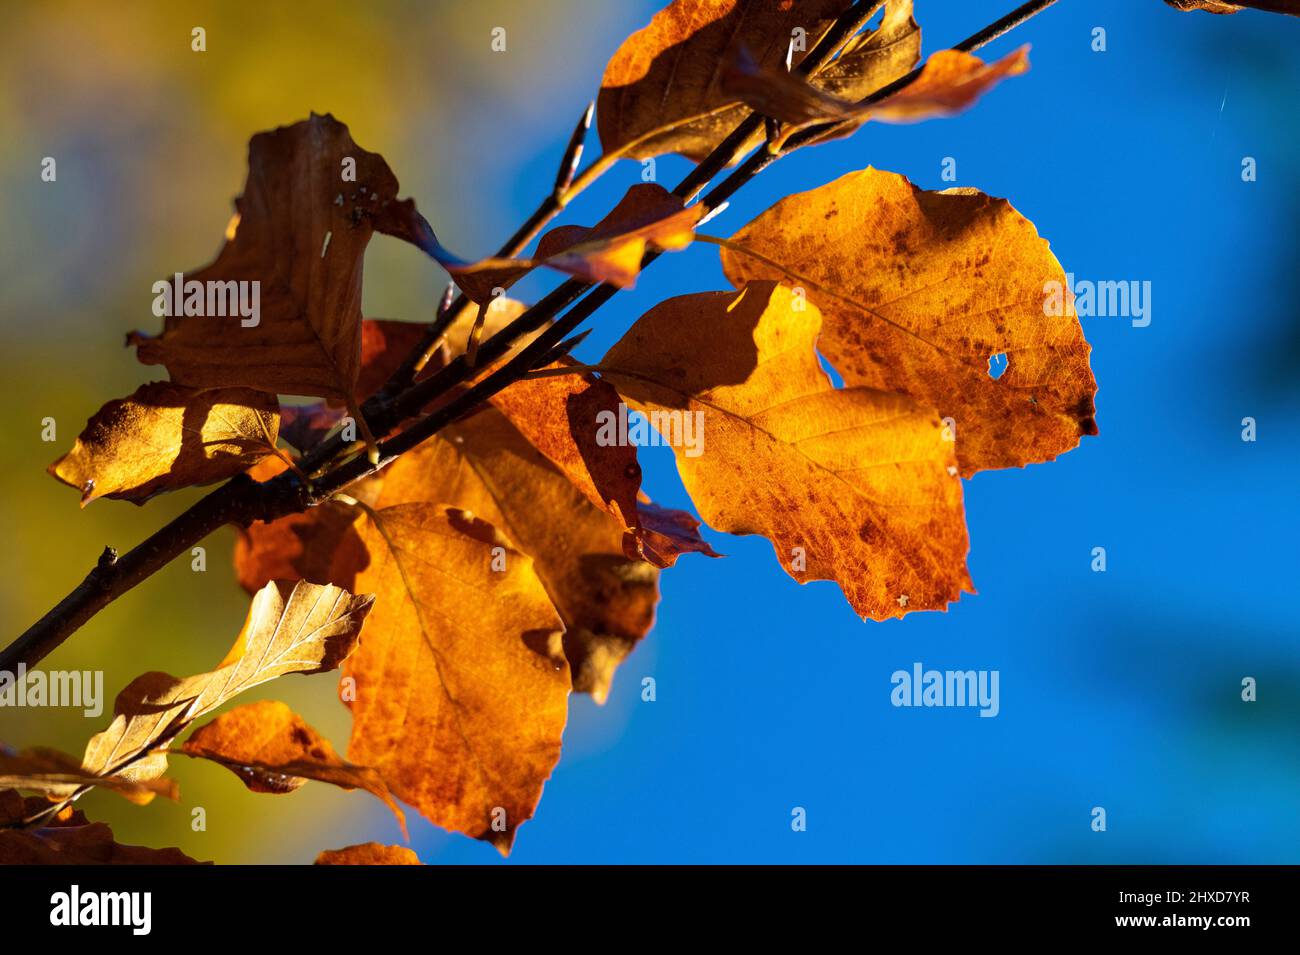 Autumn color of leaves of a beech tree against blue sky, close up, Unnaryd, Sweden Stock Photo